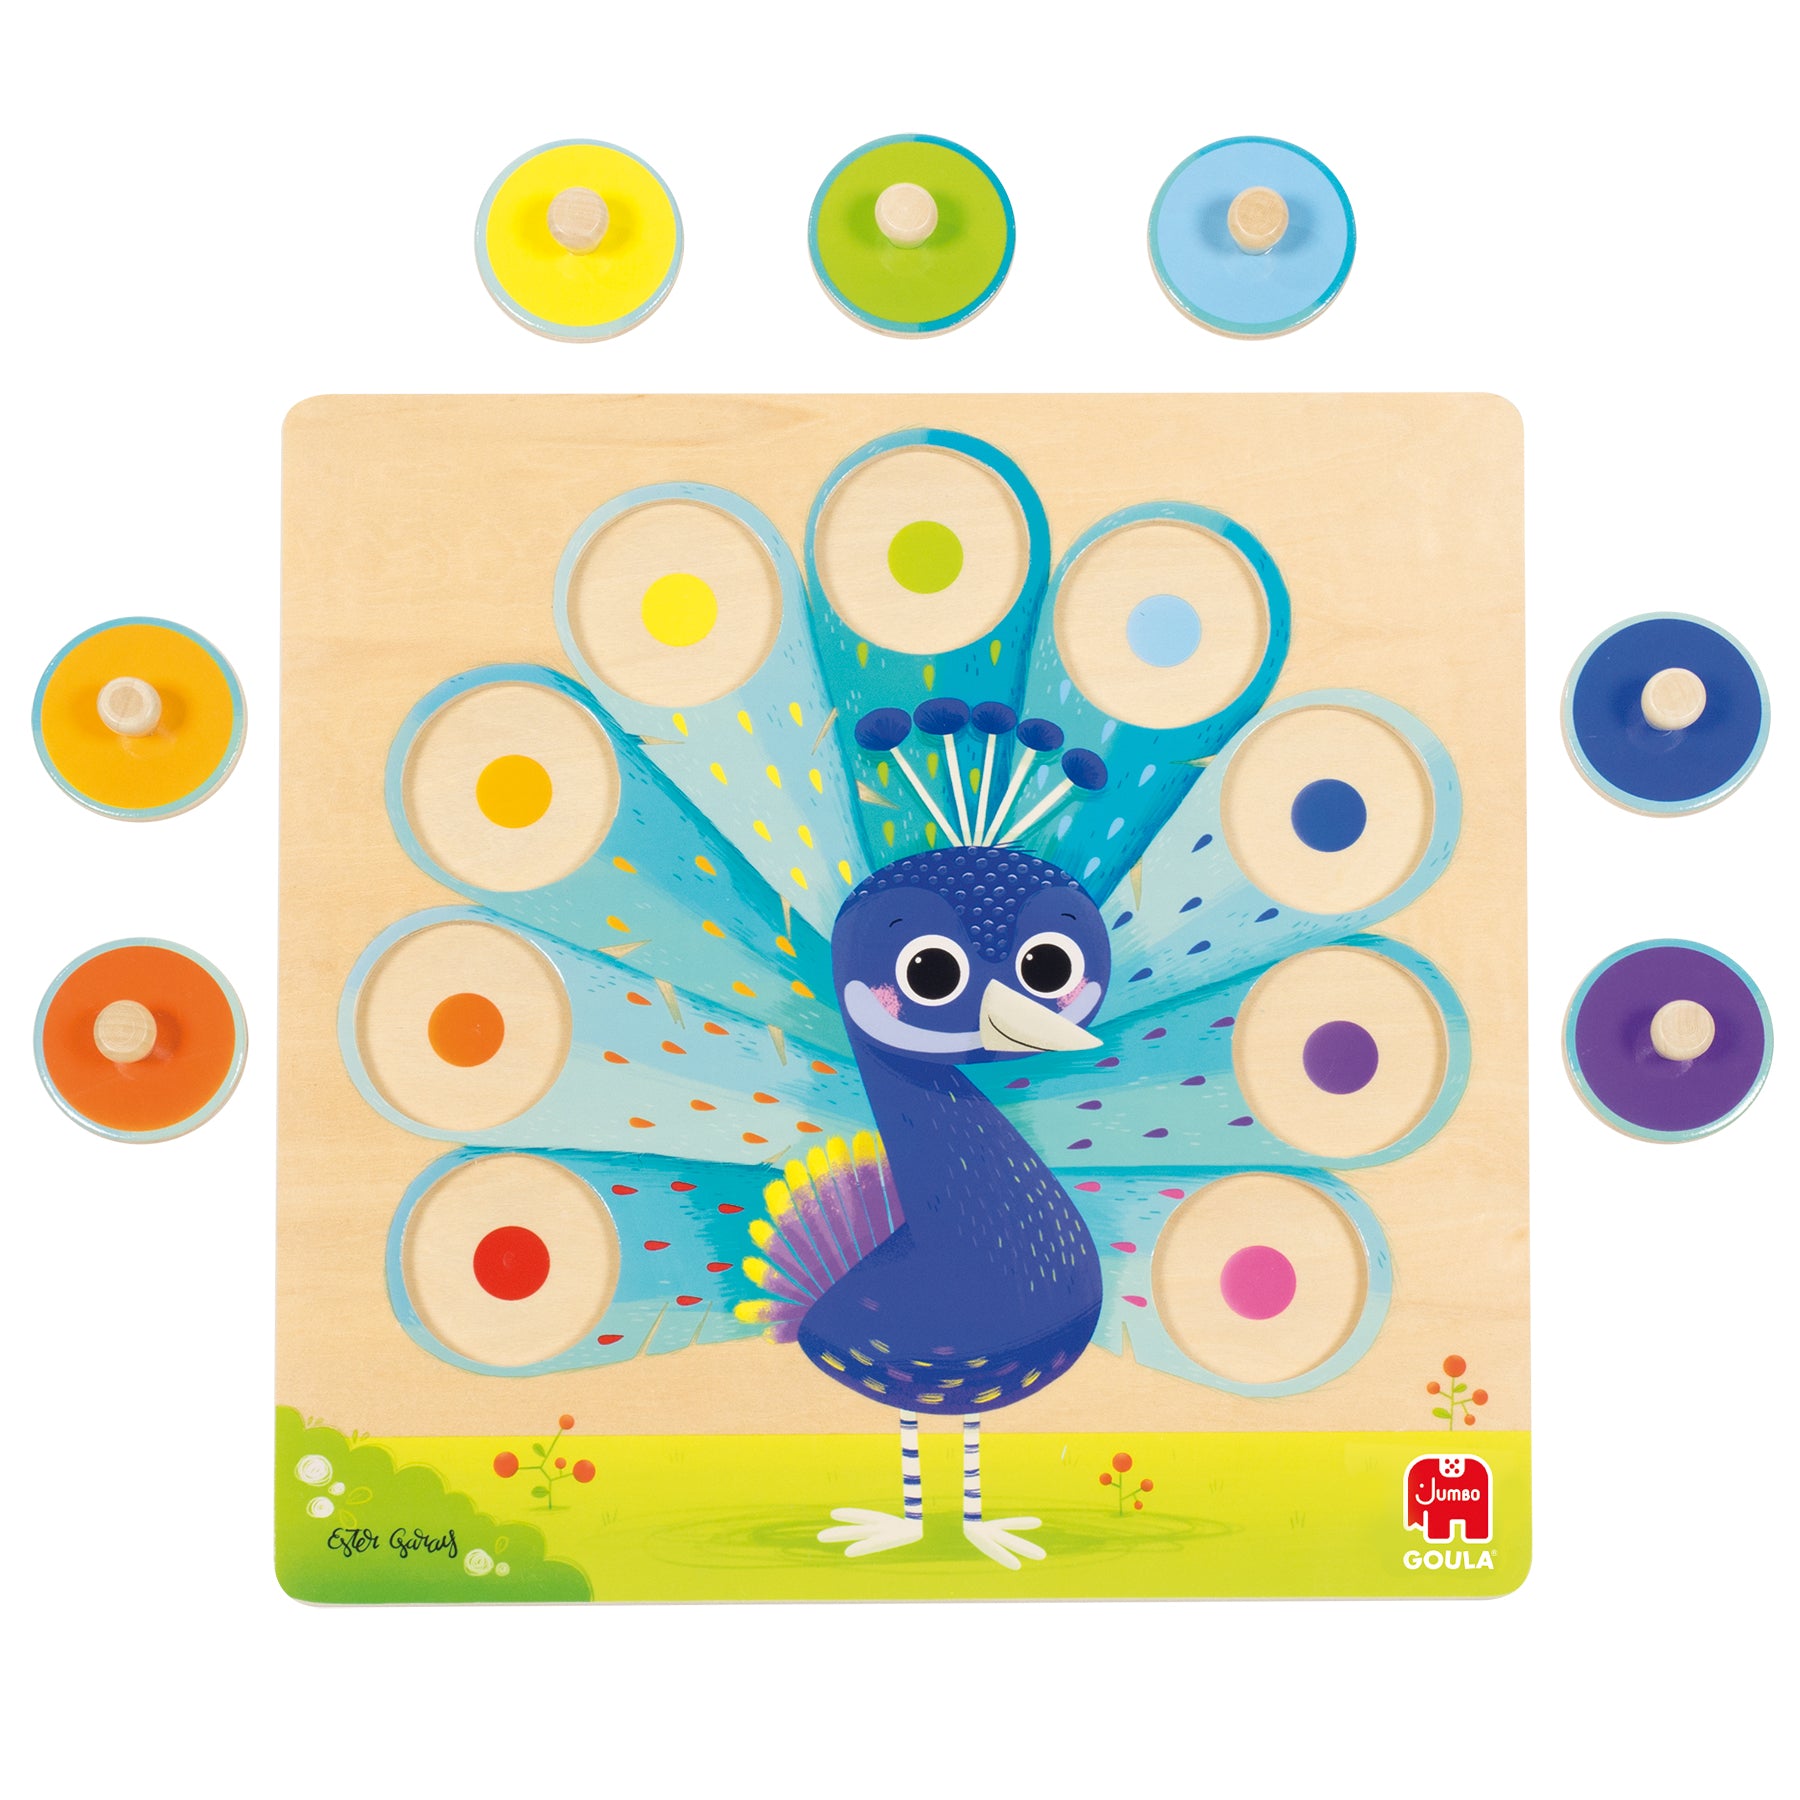 Peacock Puzzle - product image - Jumboplay.com